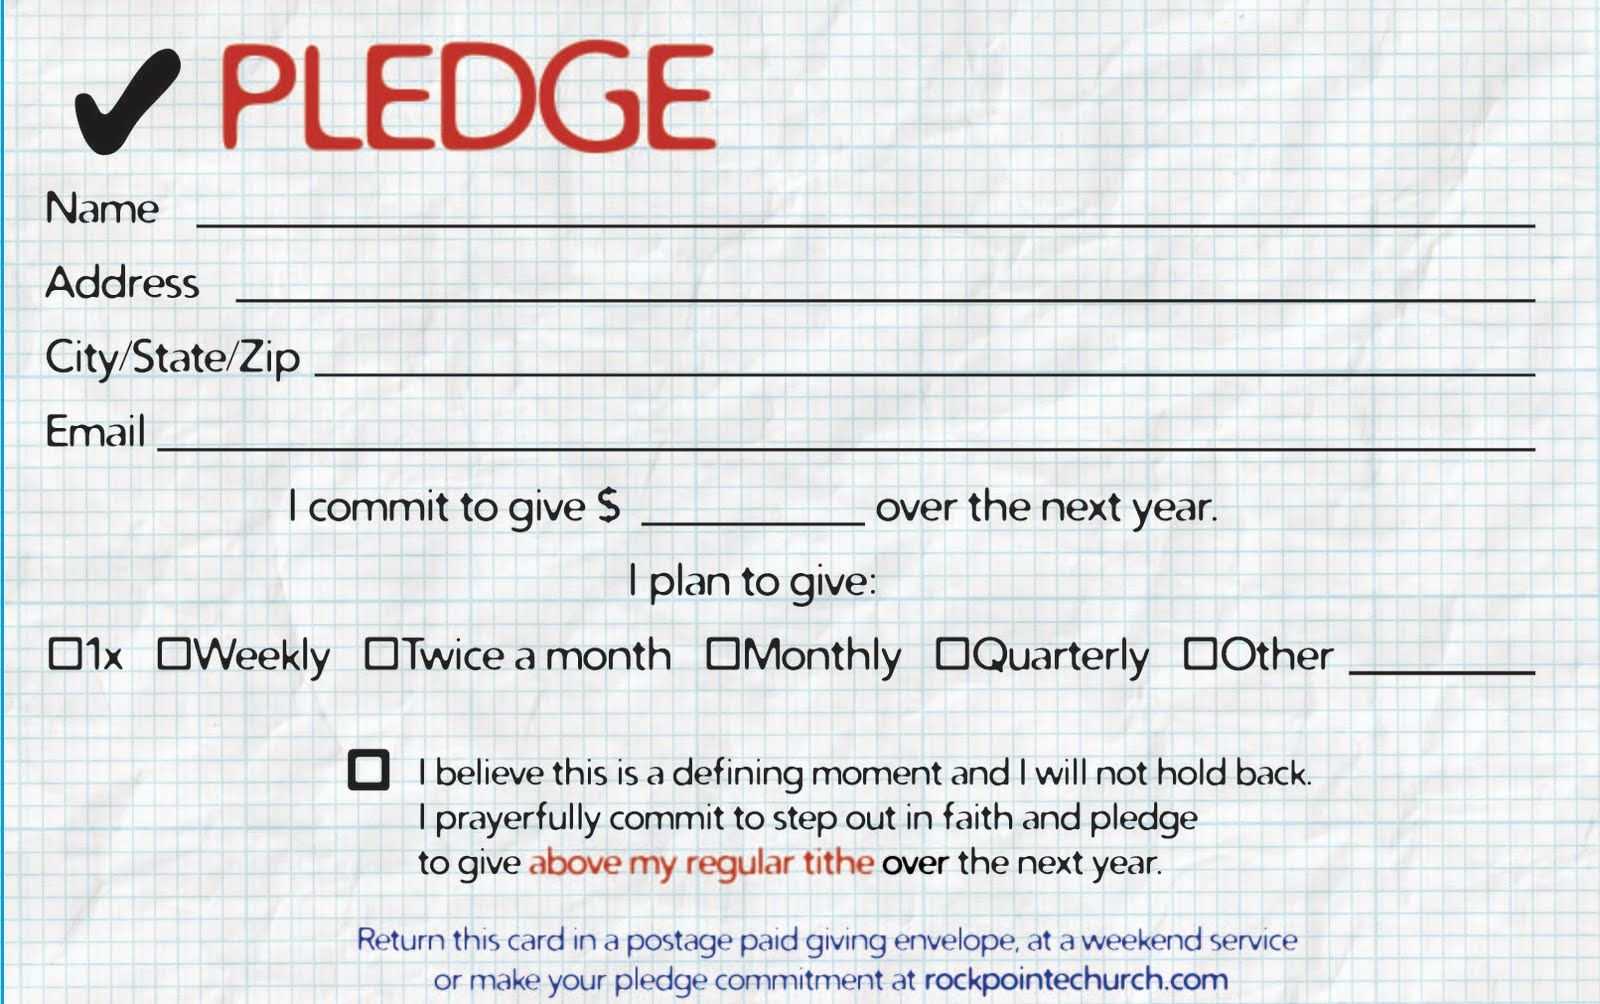 Pledge Cards For Churches | Pledge Card Templates | Card With Regard To Sponsor Card Template